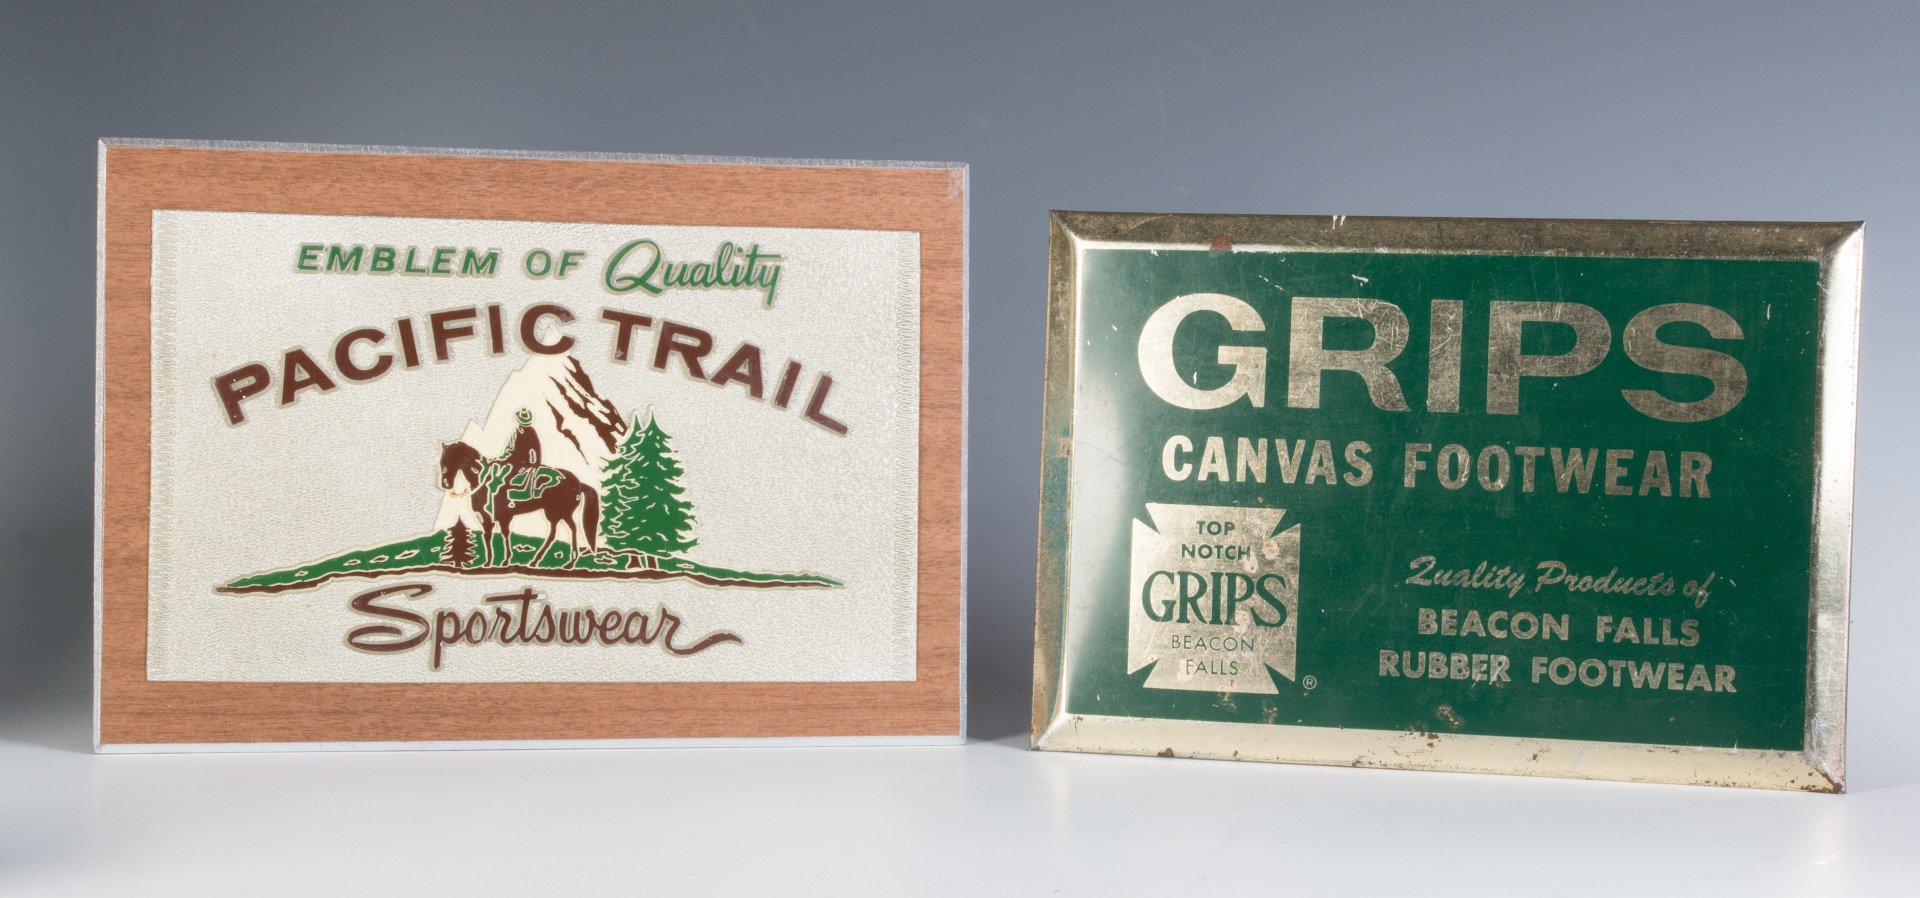 TWO VINTAGE COUNTERTOP ADVERTISING SIGNS